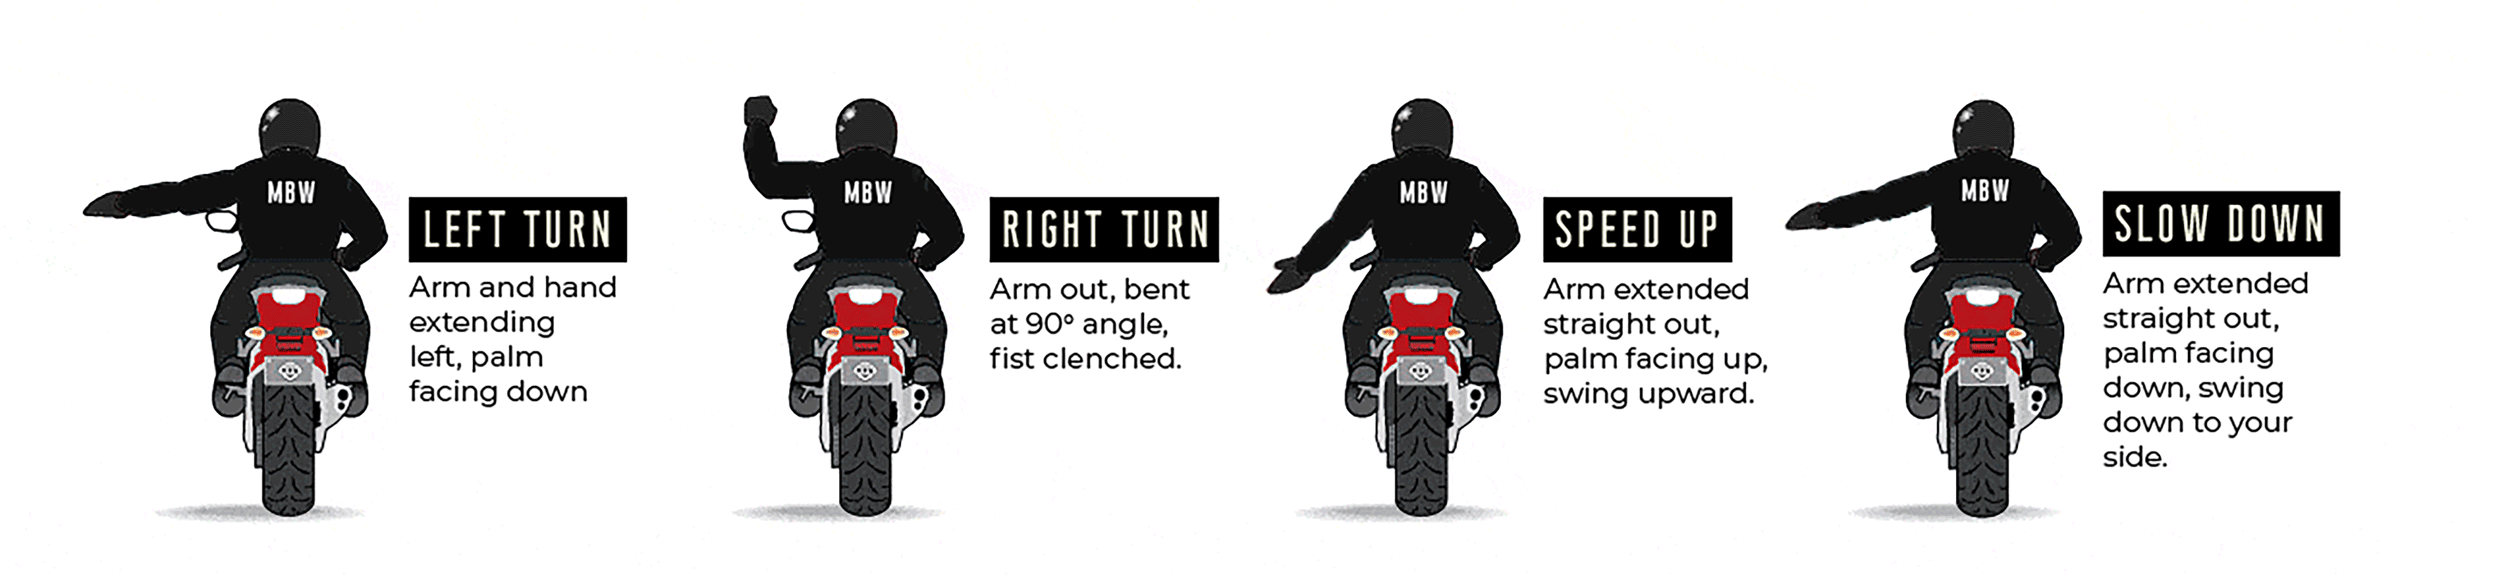 motorcycle hand signals